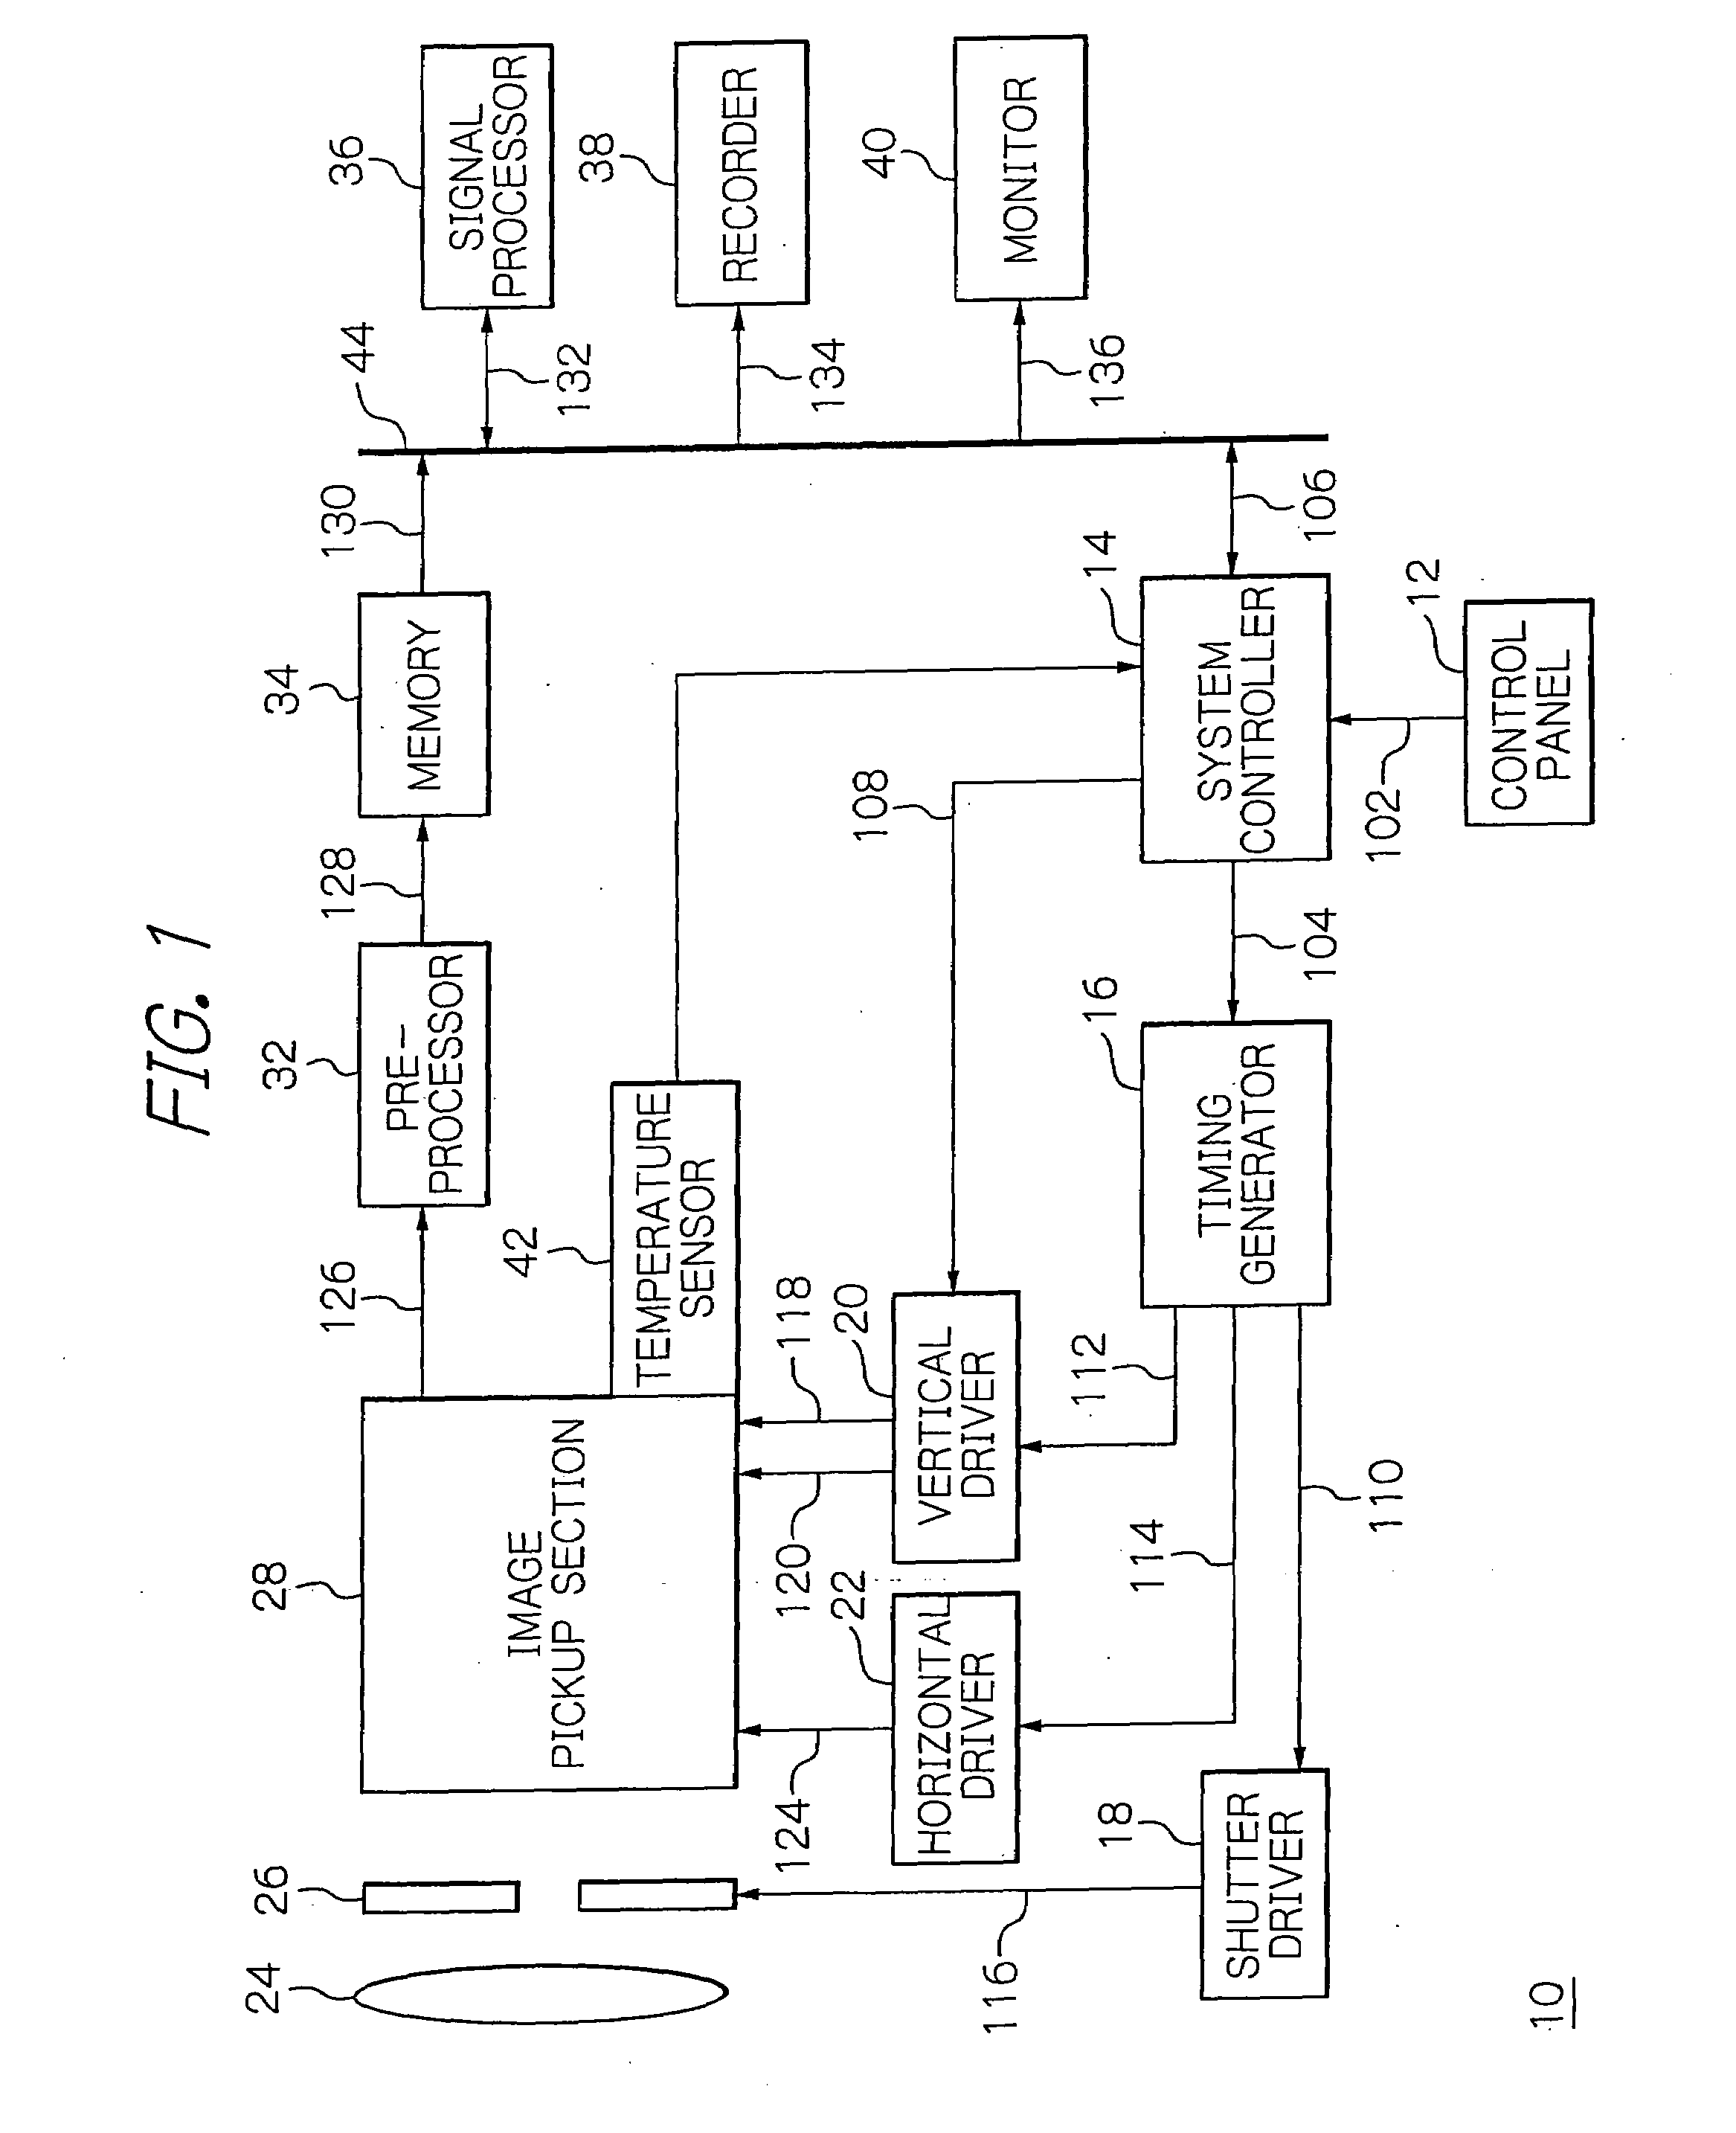 Solid-state image pickup apparatus multiplying signal charges depending on image circumstances